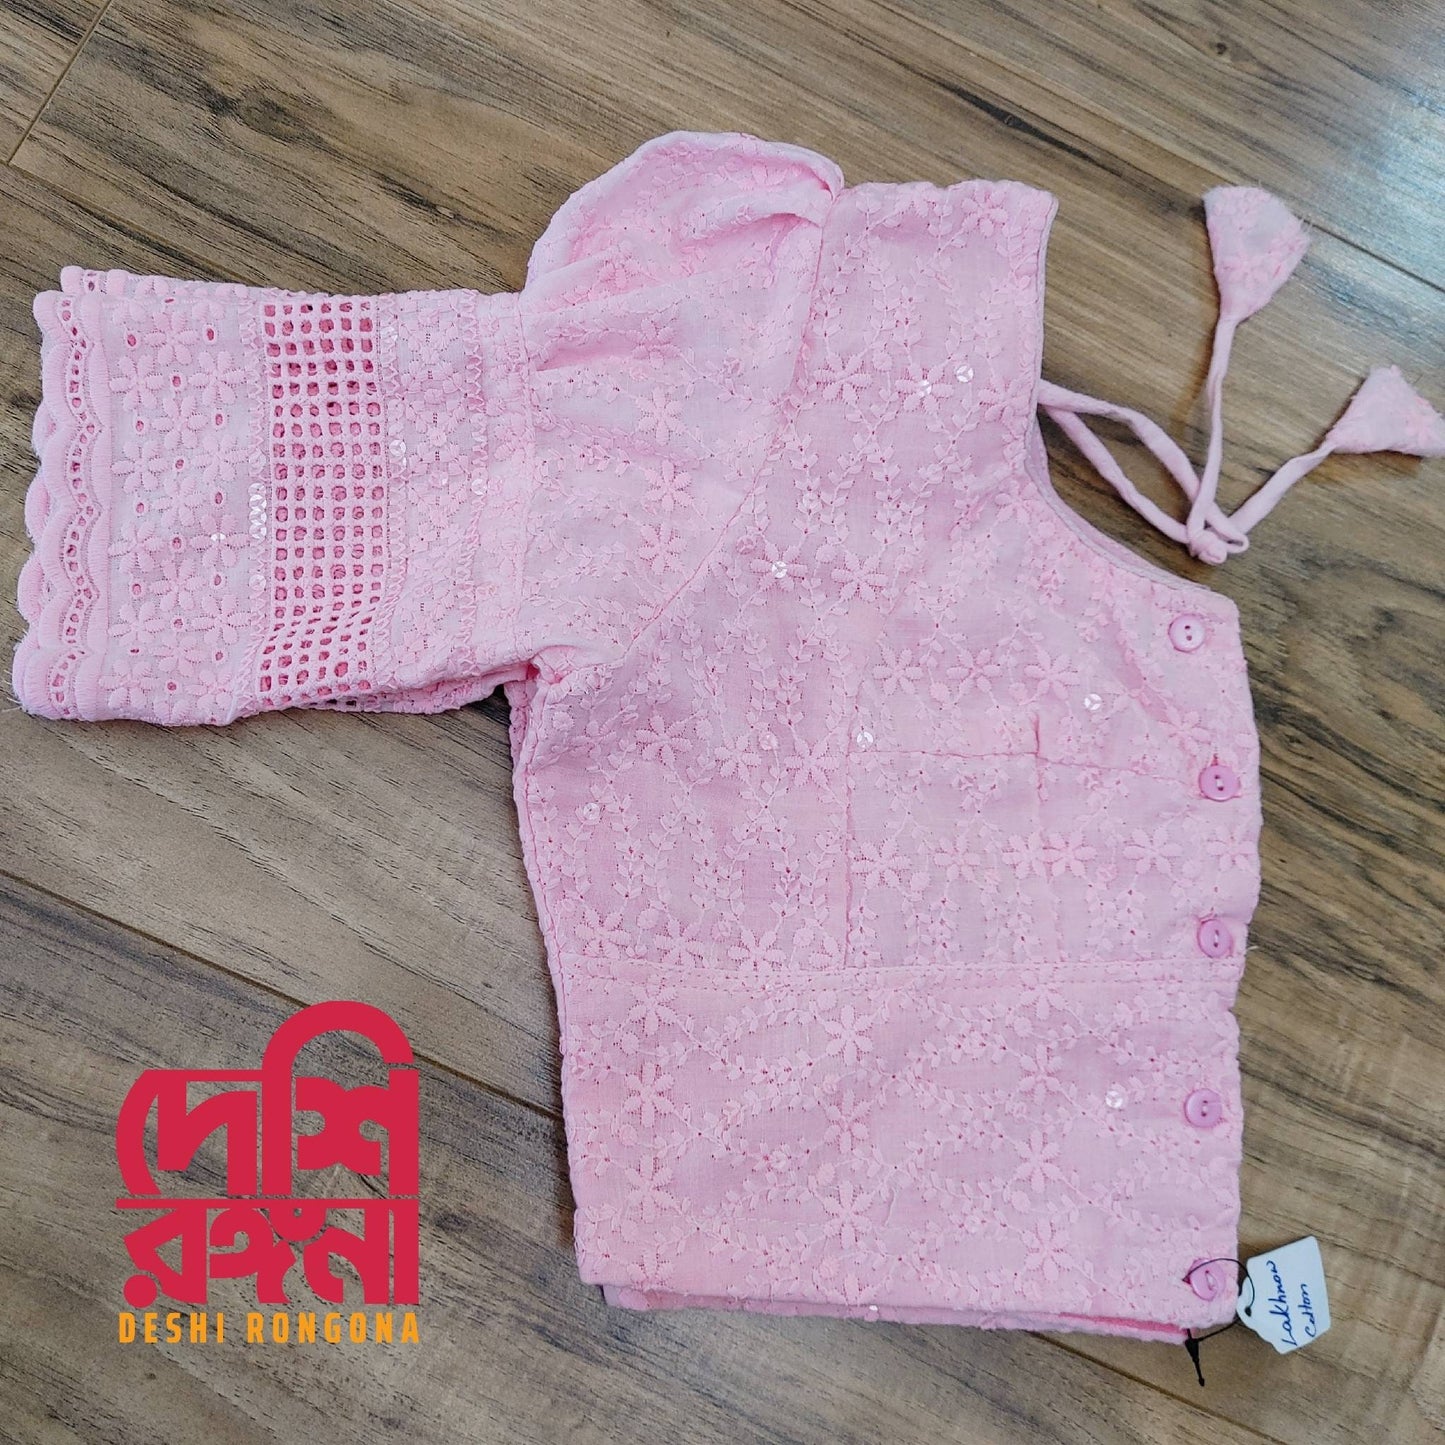 Readymade Lakhnaw Cotton Pink Blouse, Baby Pink Readymade Designer Blouse, Embroidered, Comfortable, goes with any contrast saree